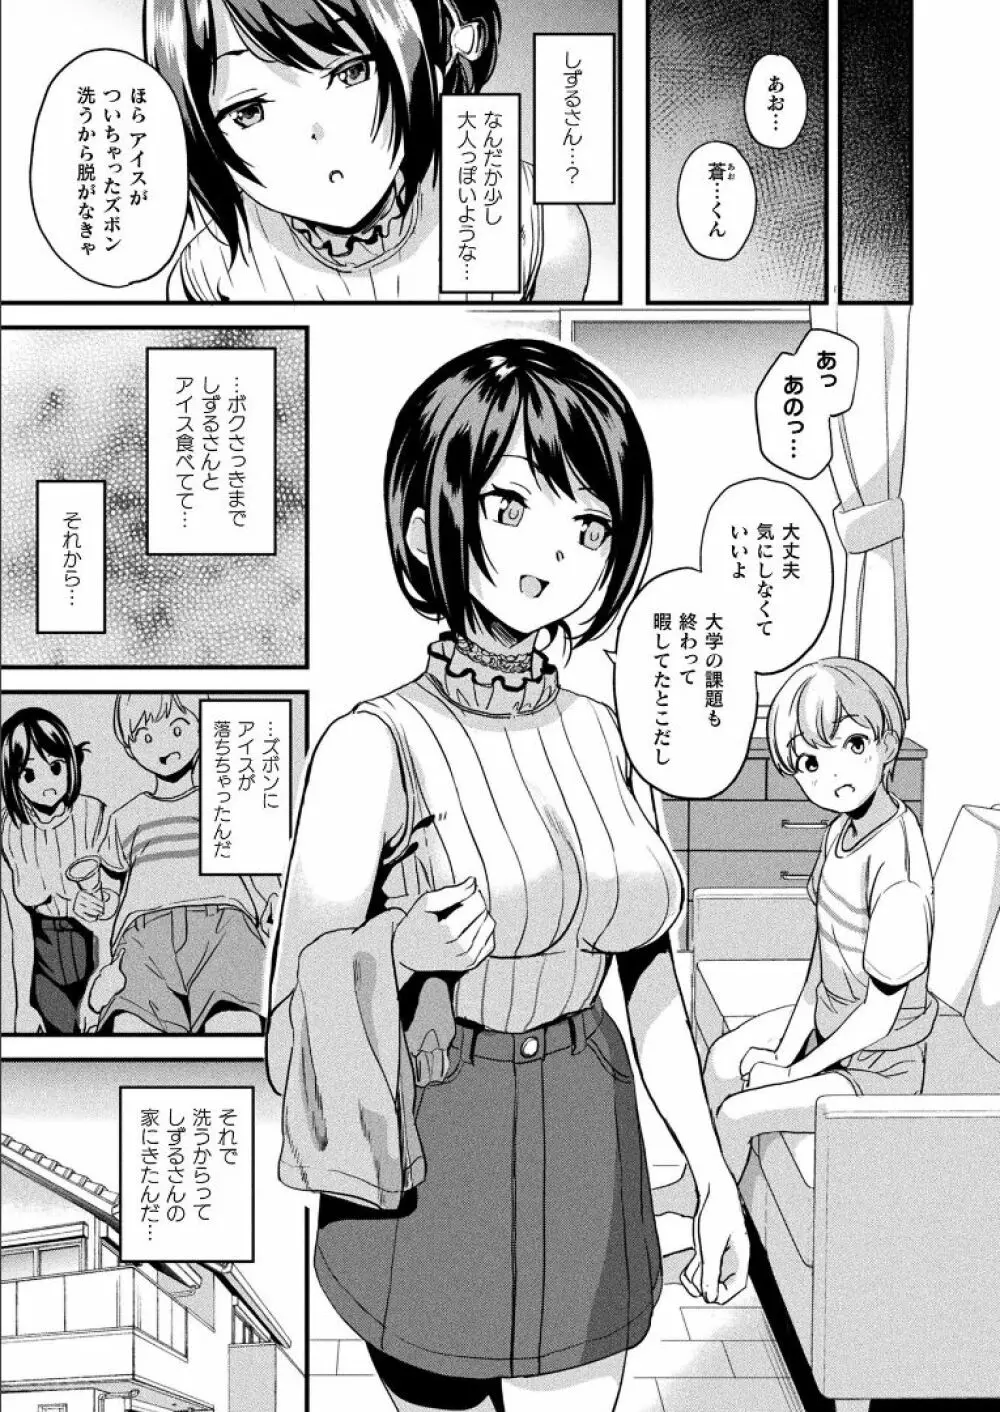 [DATE] 改変対象 第3話 (コミックアンリアル 2021年6月号 Vol.94) RAW - page7